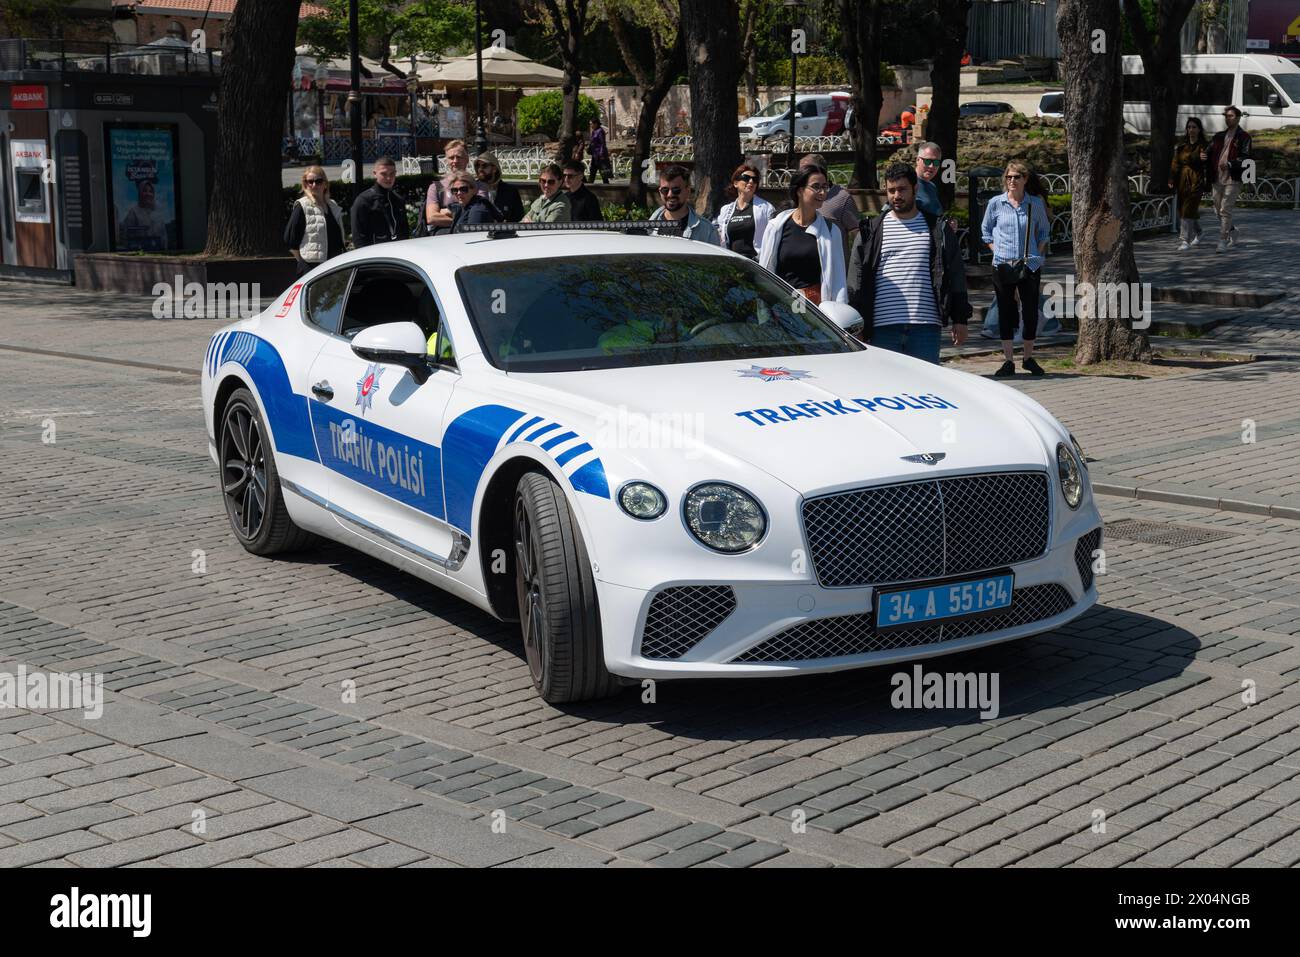 ISTANBUL, TURKEY - APRIL 7, 2024: Bentley Luxury Police Car parked in Sultanahmet square. Bentley seized from Turkish criminal organizations became po Stock Photo